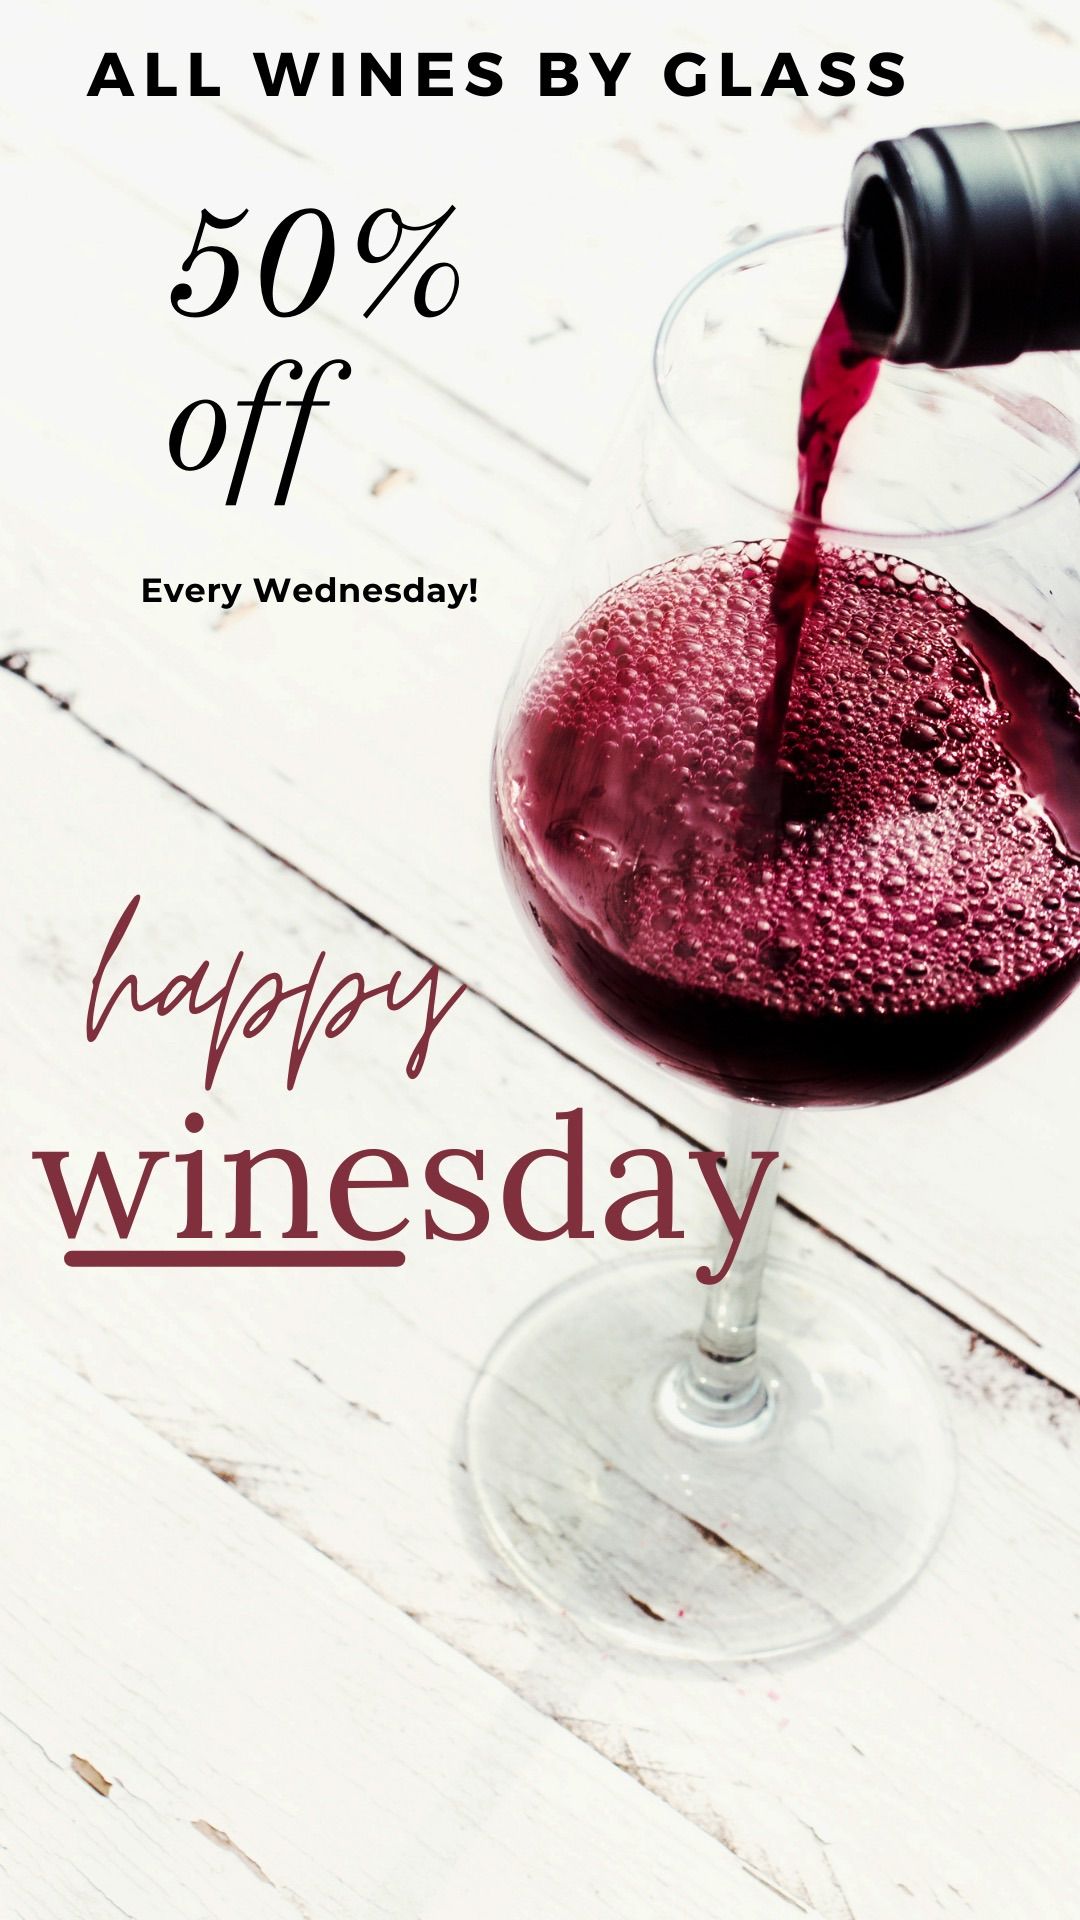 Wine Wednesday *Half off glasses of wine all day*